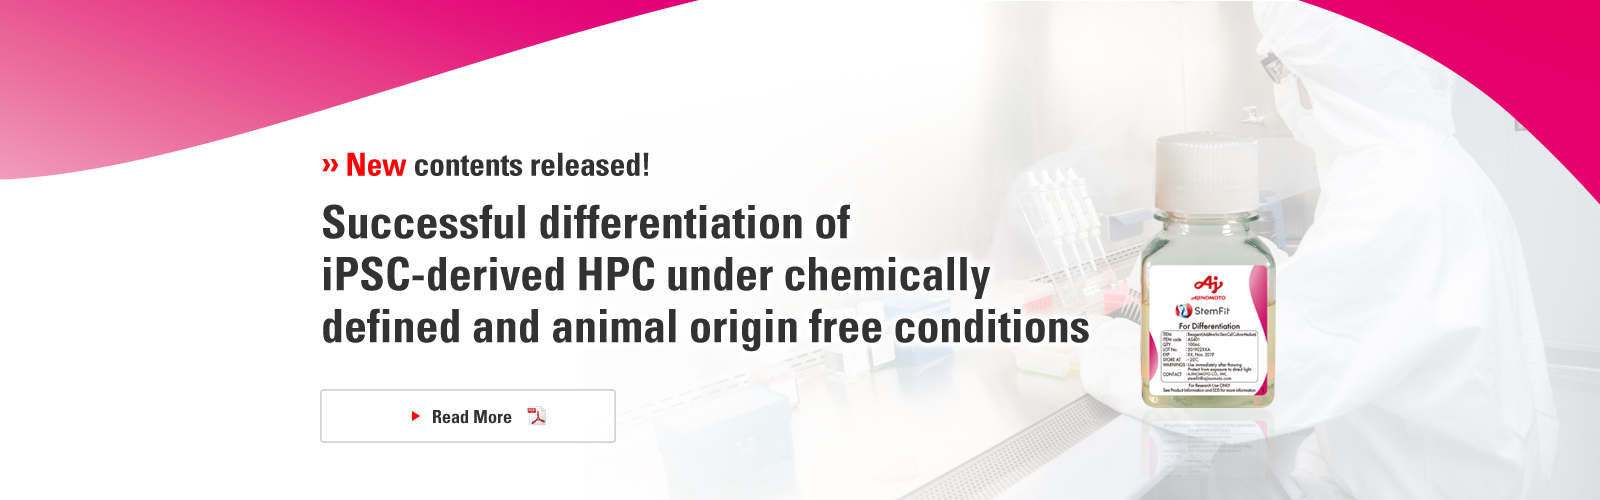 New contents released! Successful differentiation of iPSC-derived HPC under chemically defined and animal origin free Read More